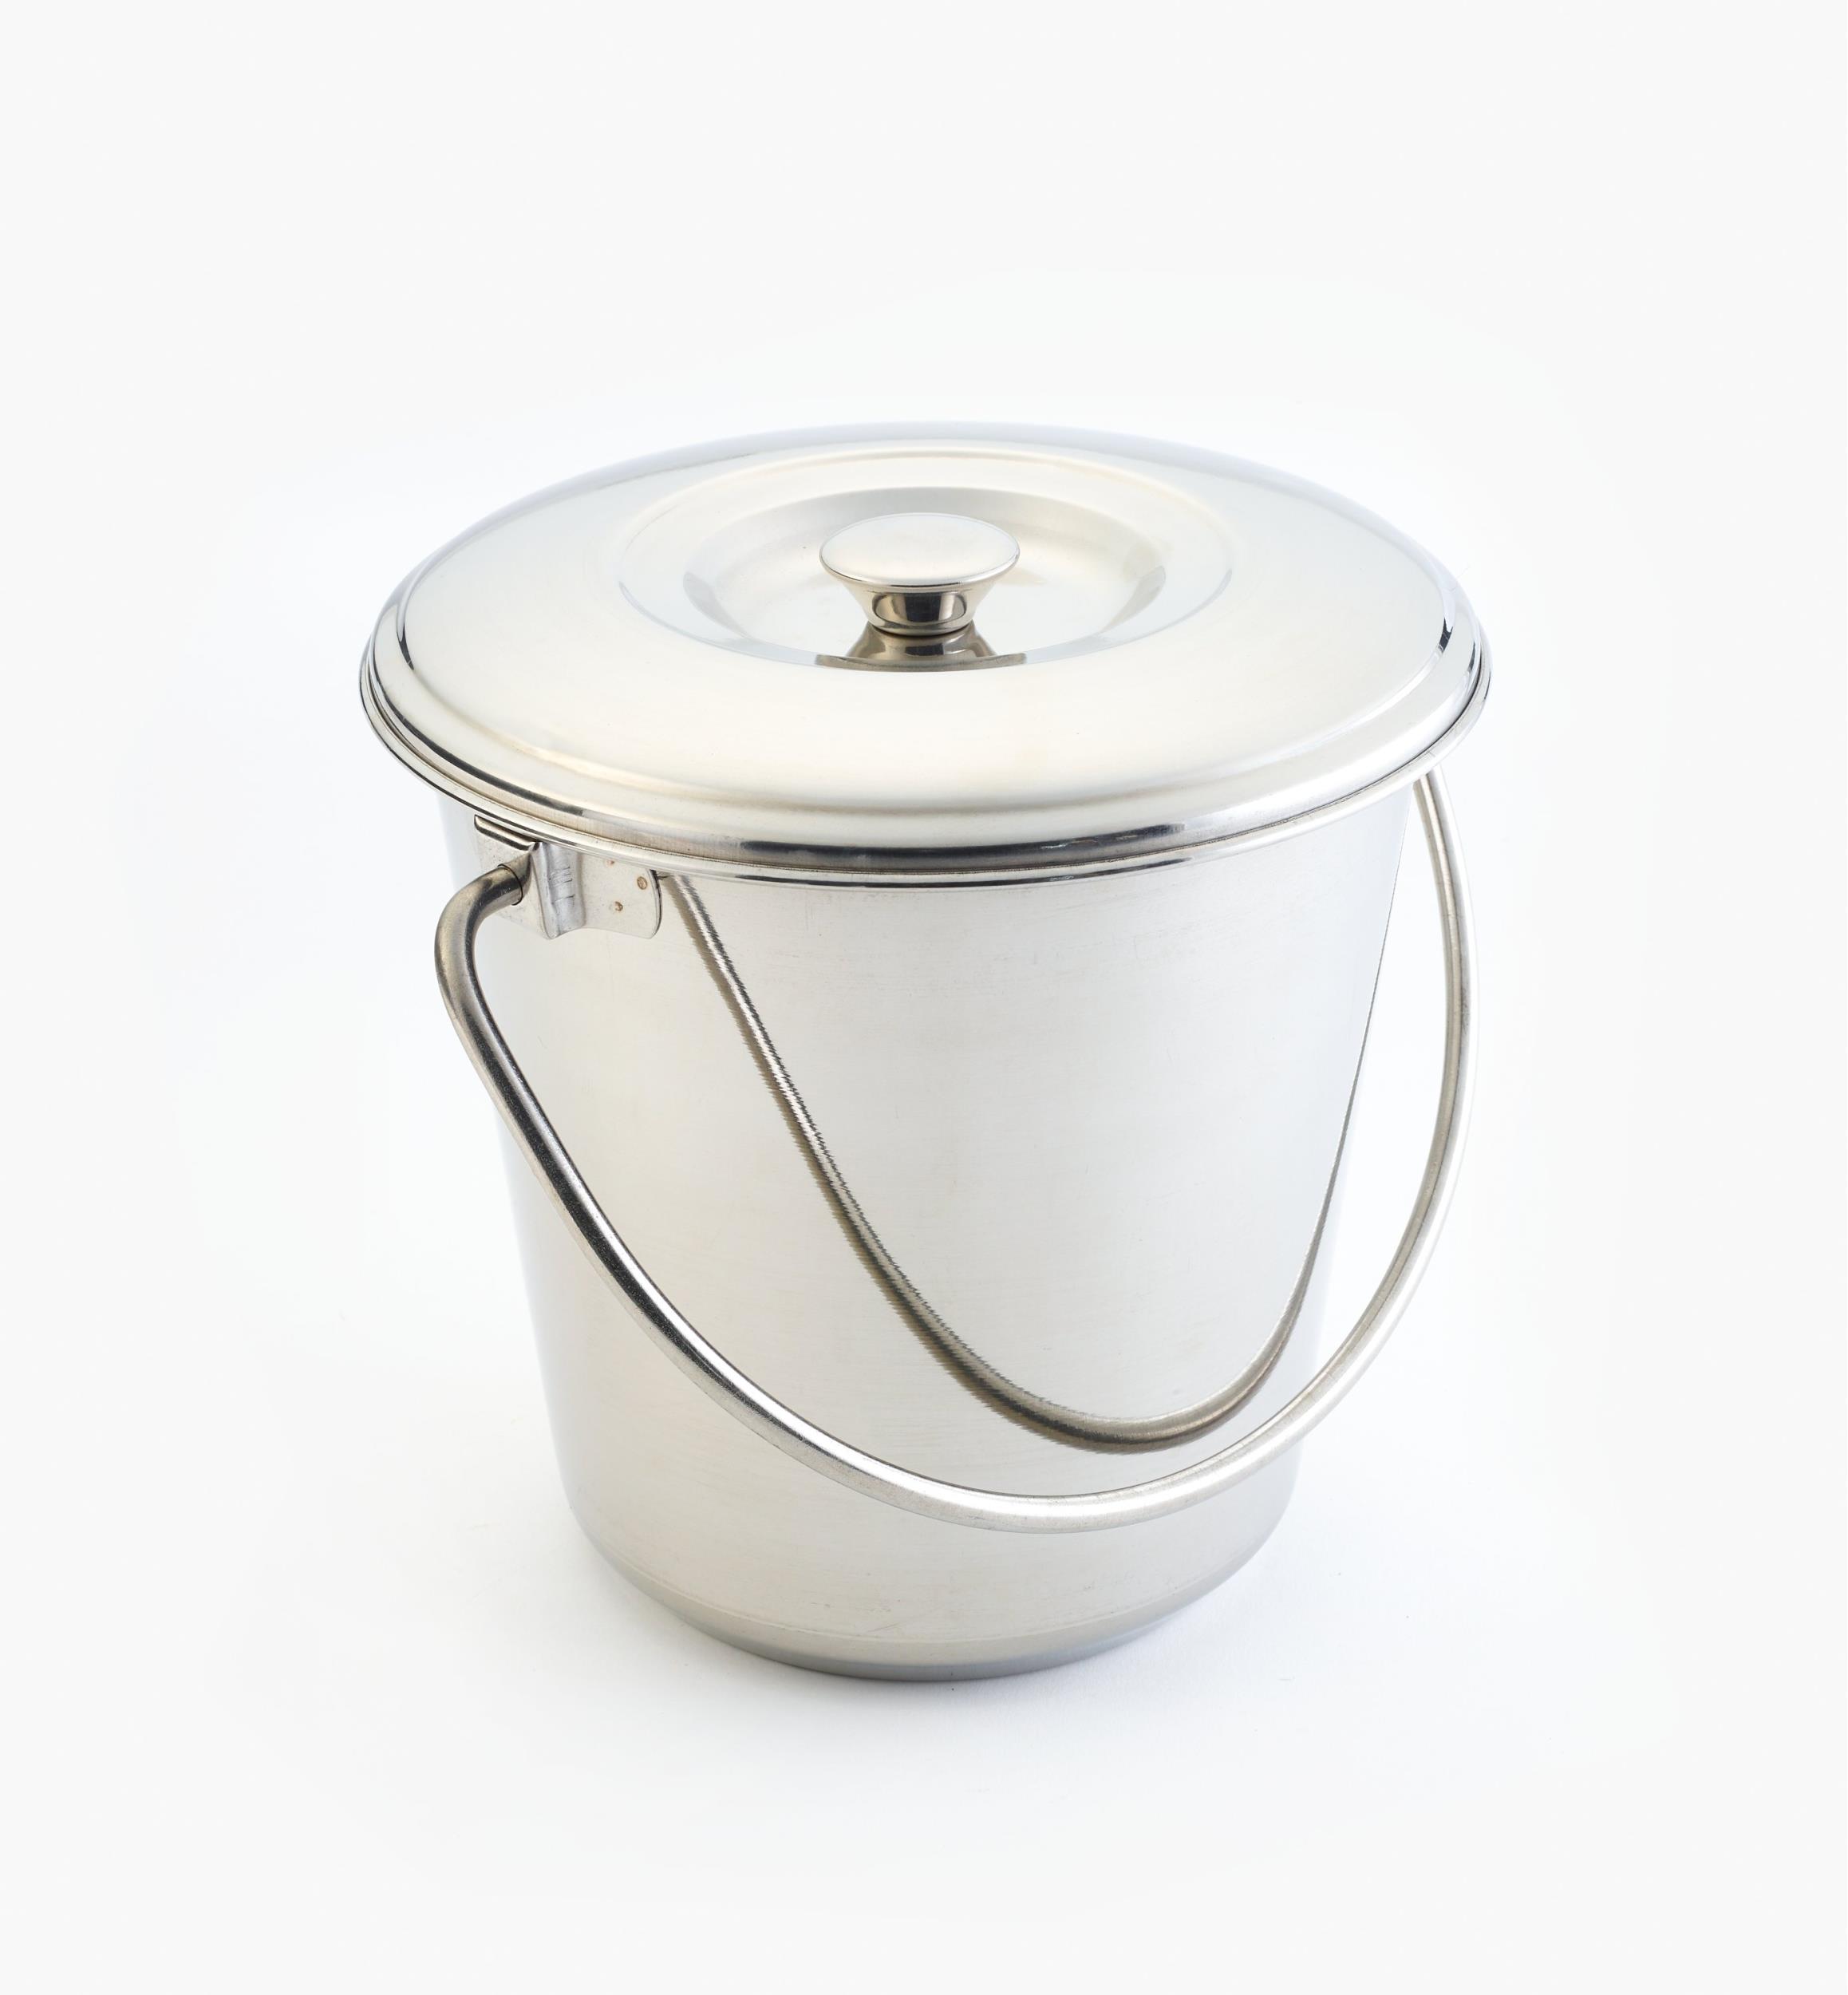 New Other Stainless Steel Milk & Compost Pail with Lid 